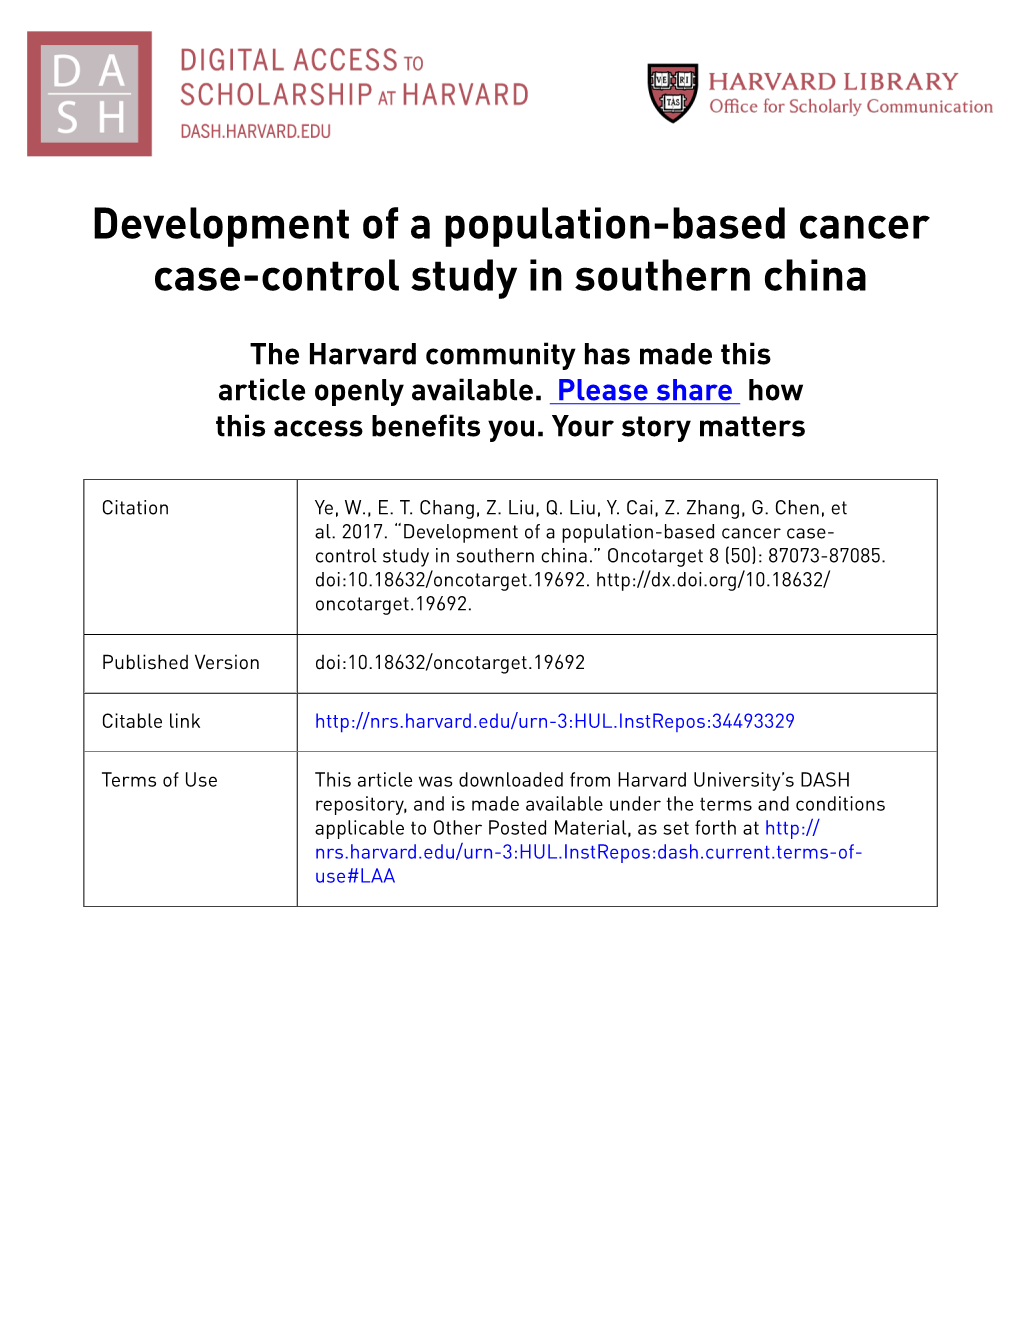 Development of a Population-Based Cancer Case-Control Study in Southern China